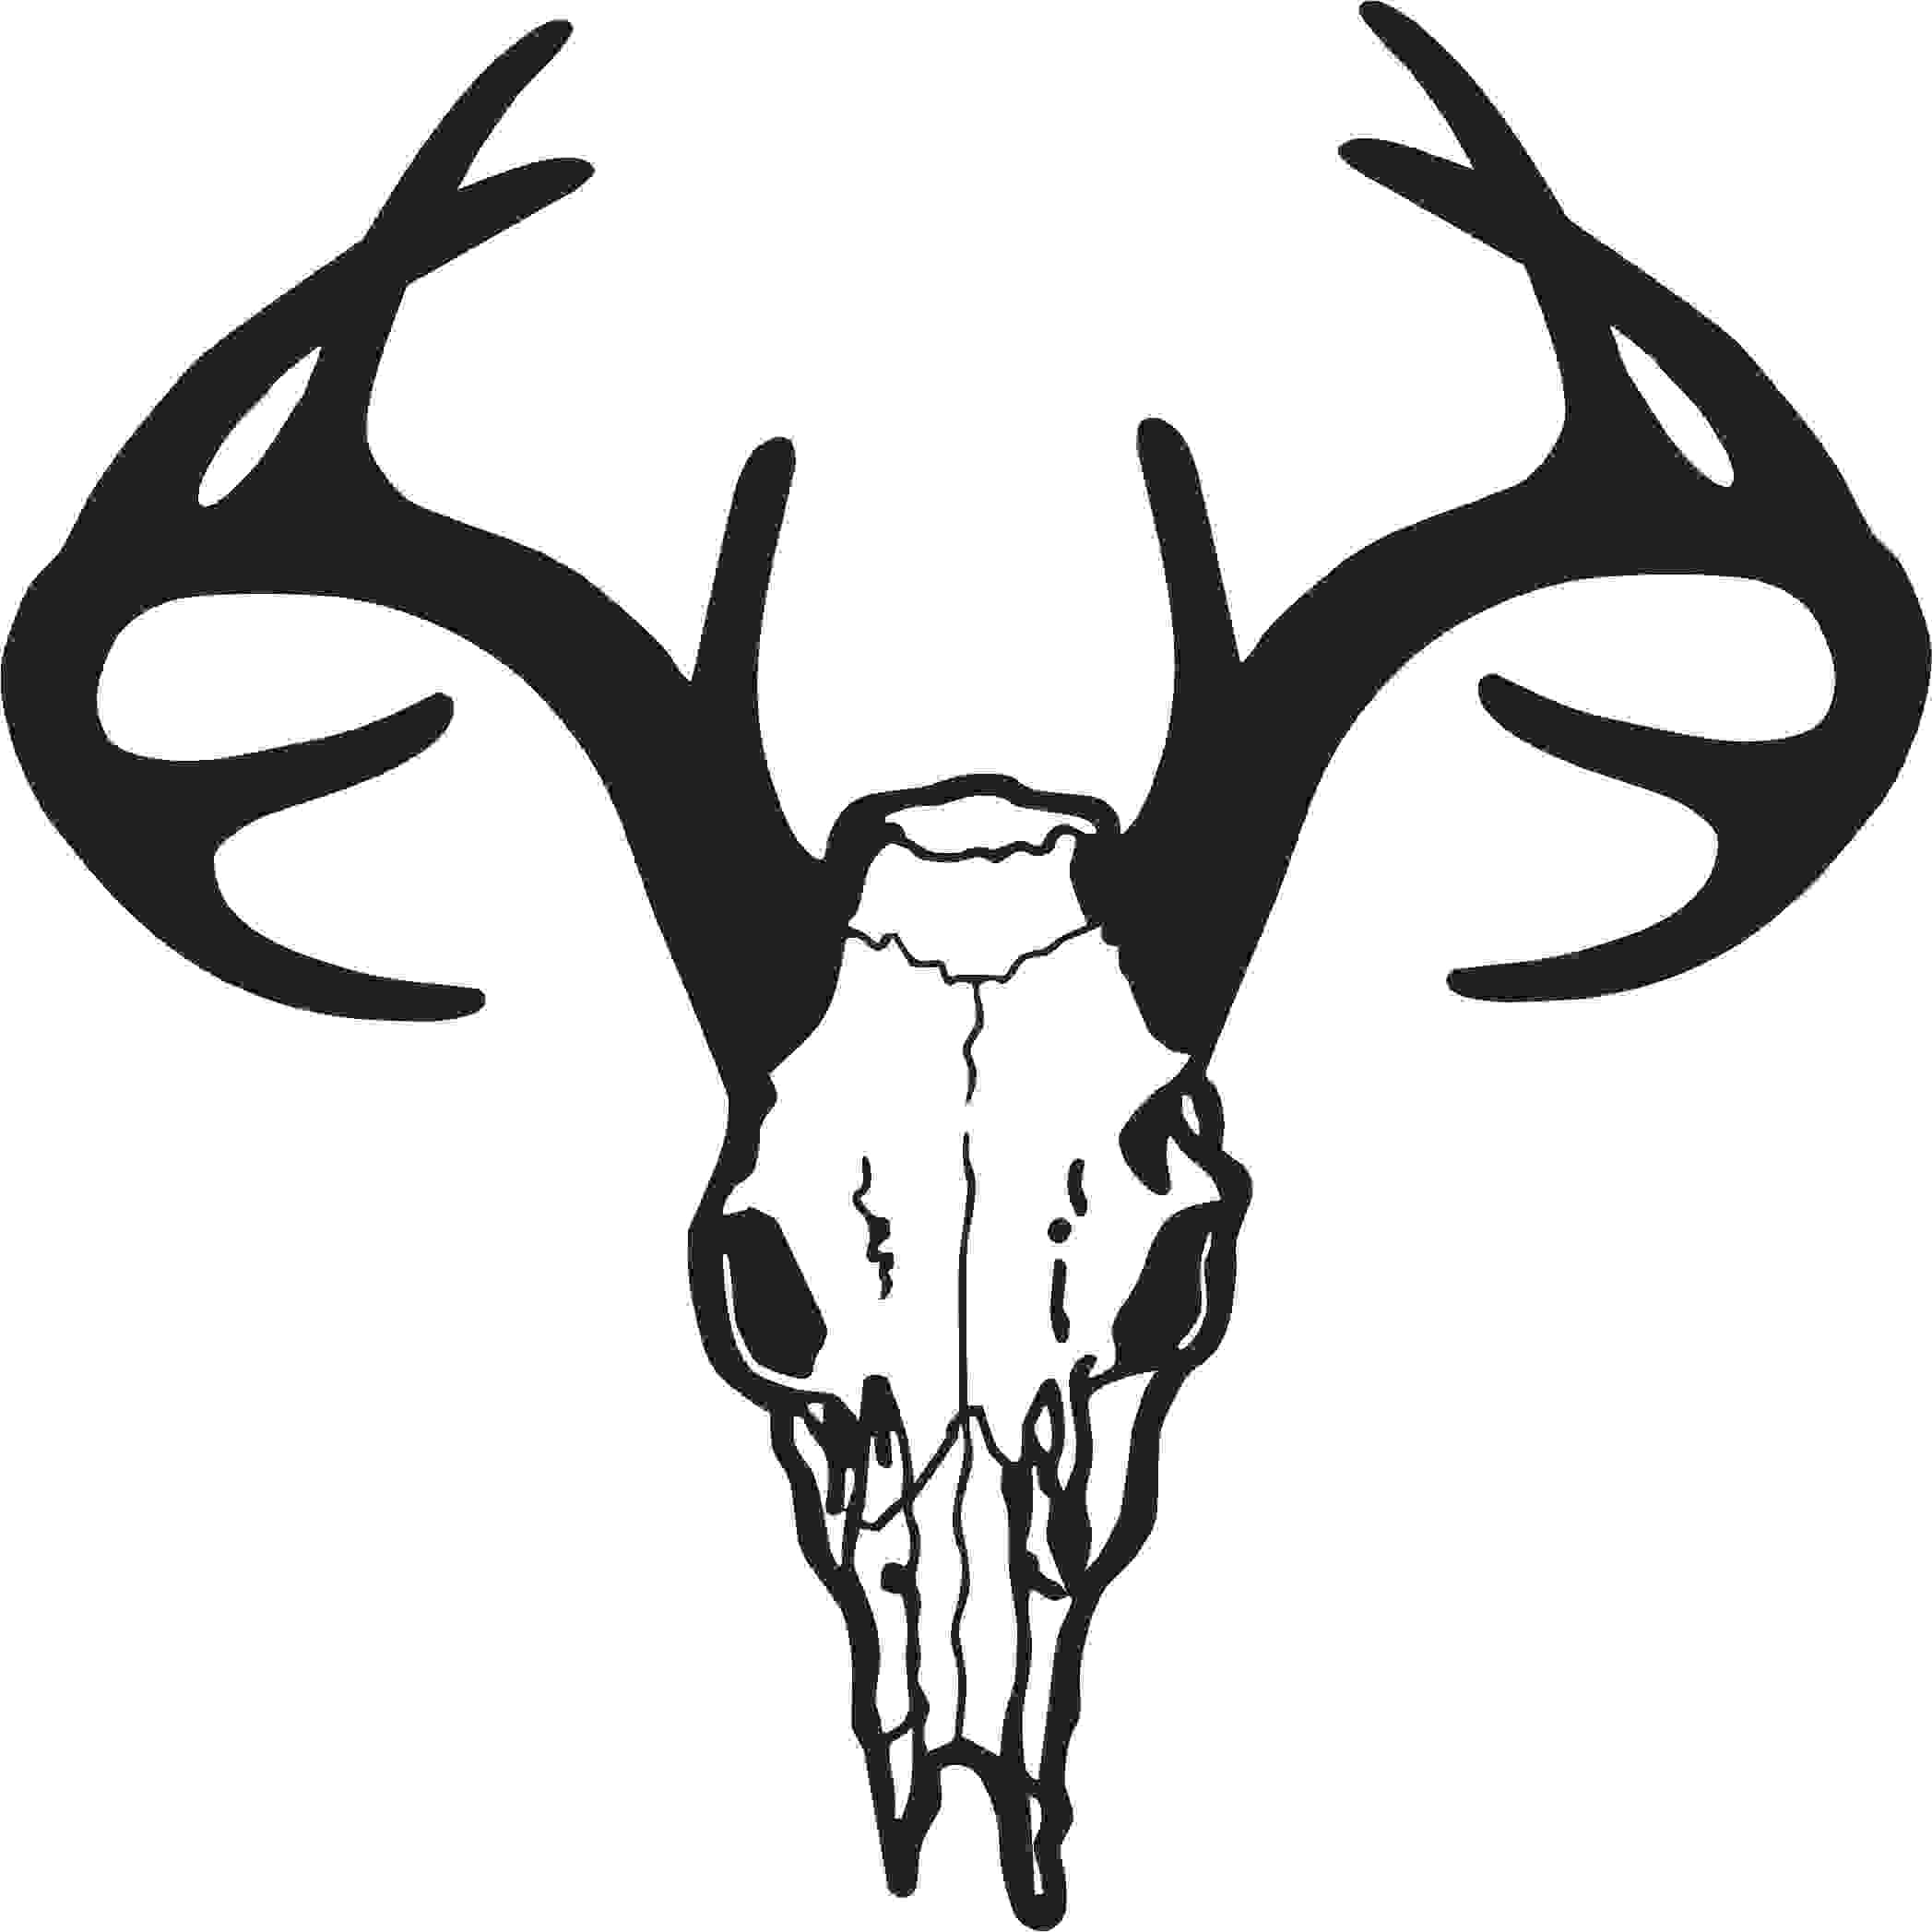 Deer Antlers Clipart Black And White | Clipart Panda - Free ...